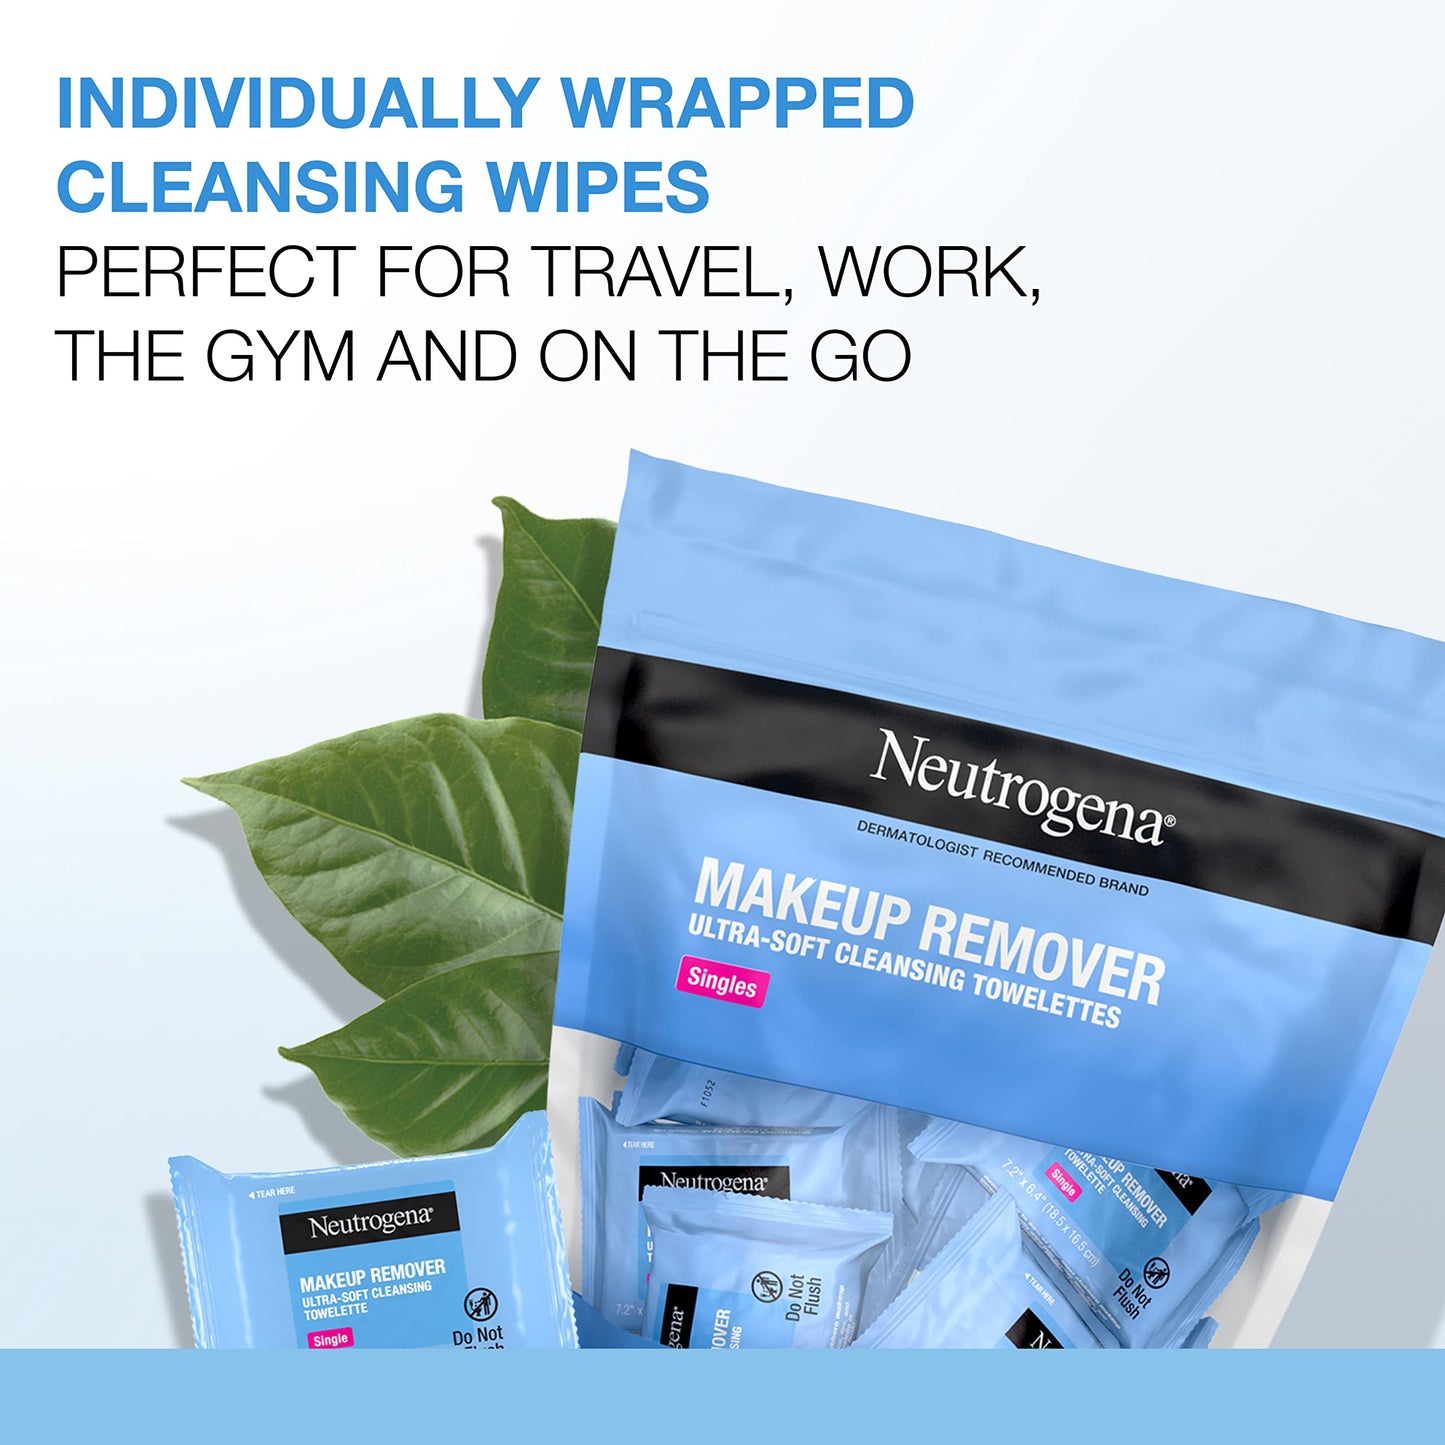 Neutrogena Makeup Remover Facial Cleansing Towelette Singles, 20 ct